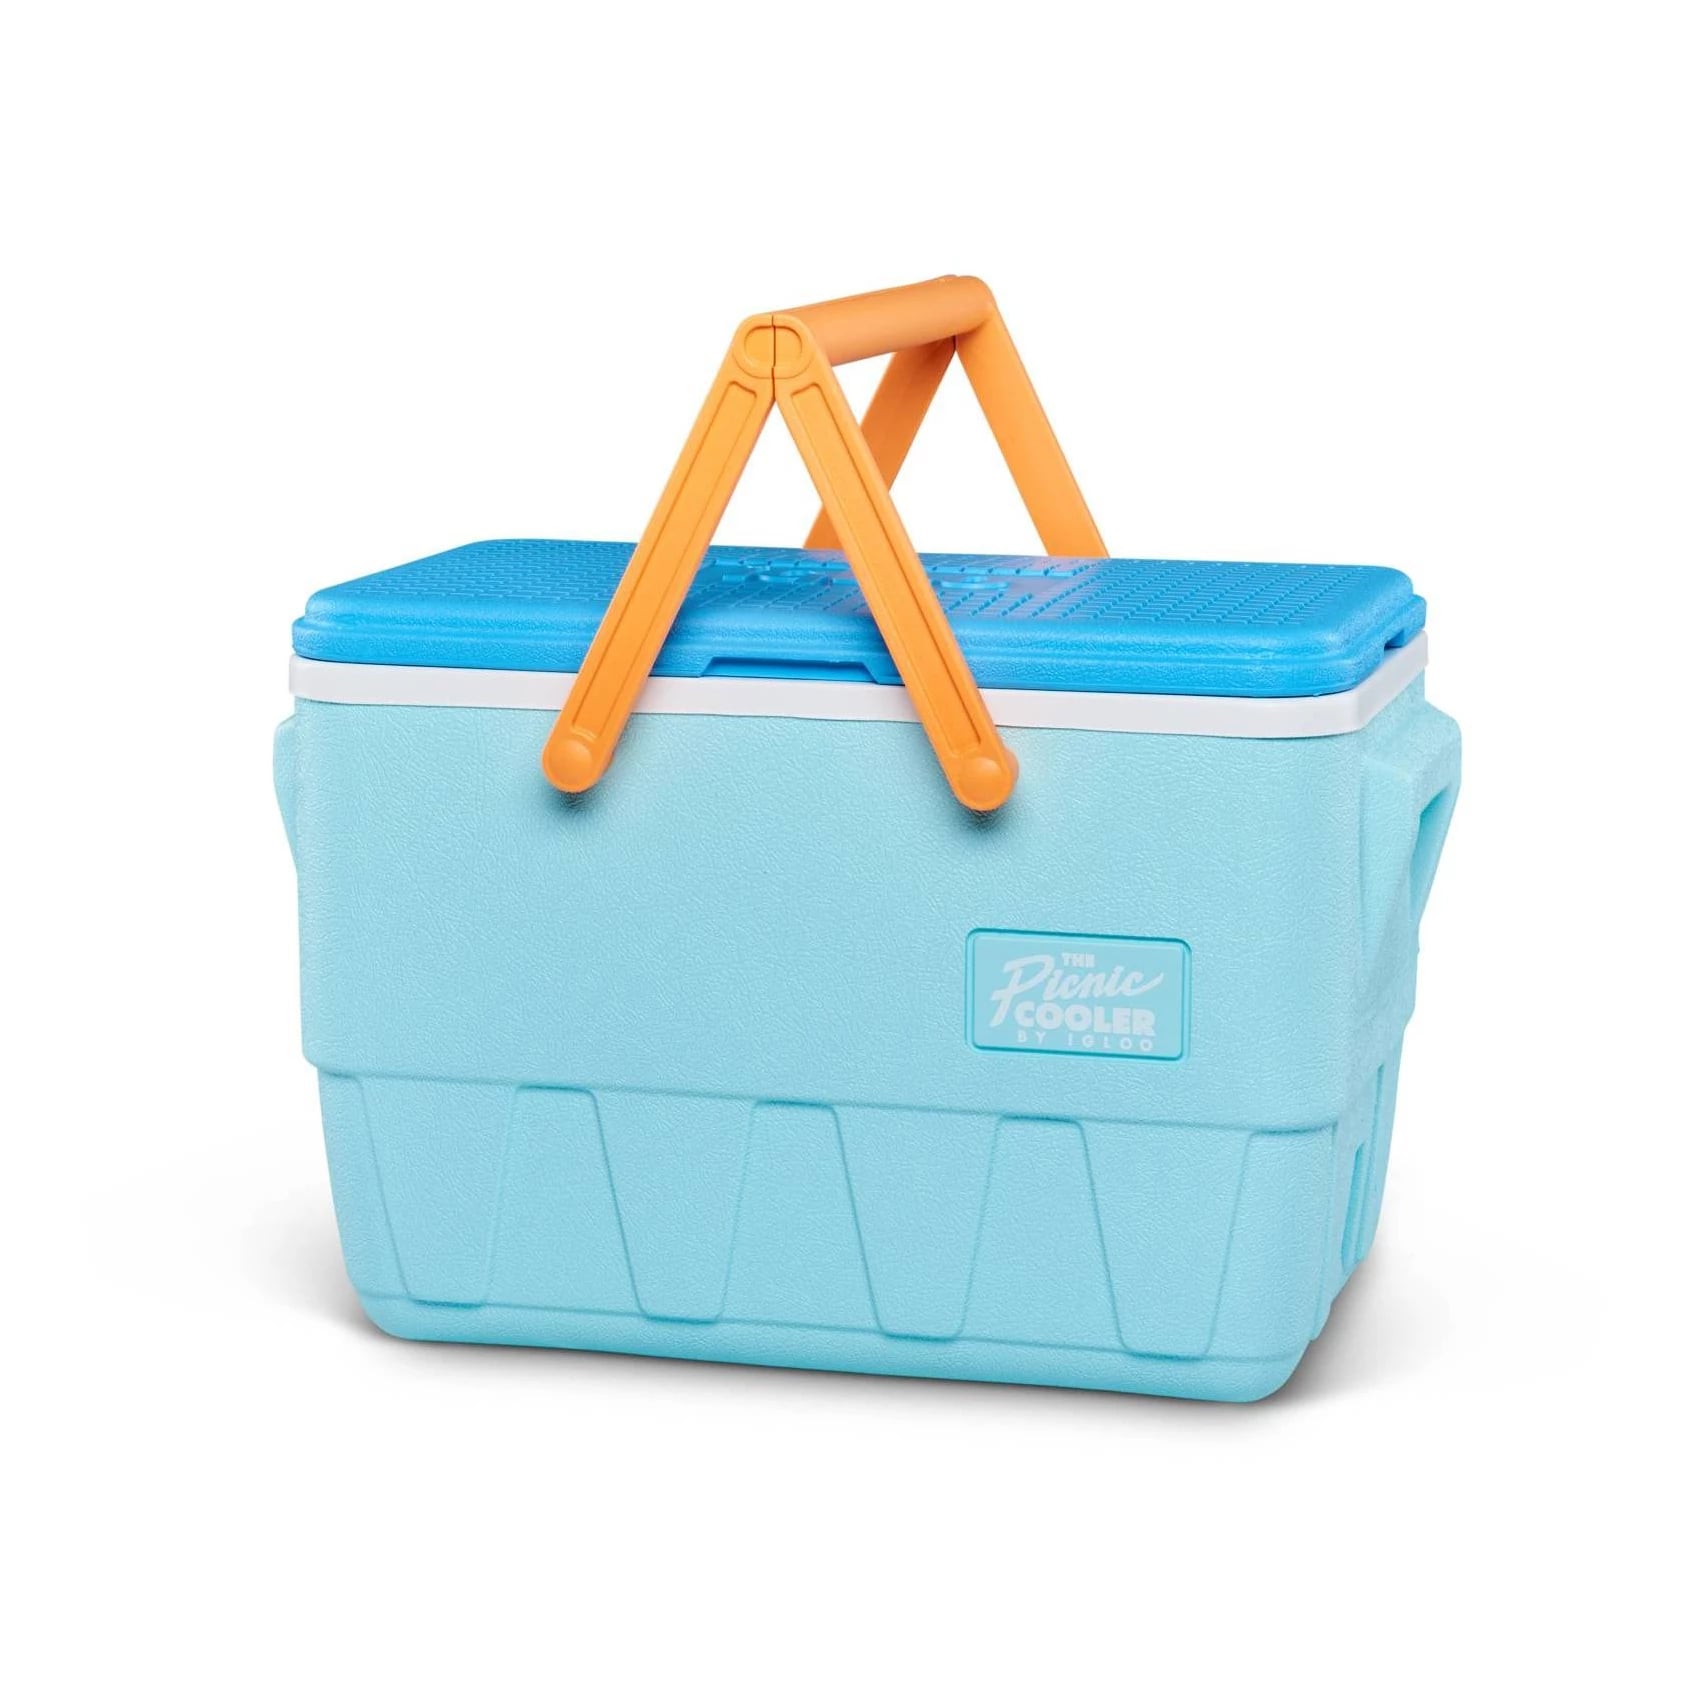 Igloo's Retro '90s-Inspired Coolers 